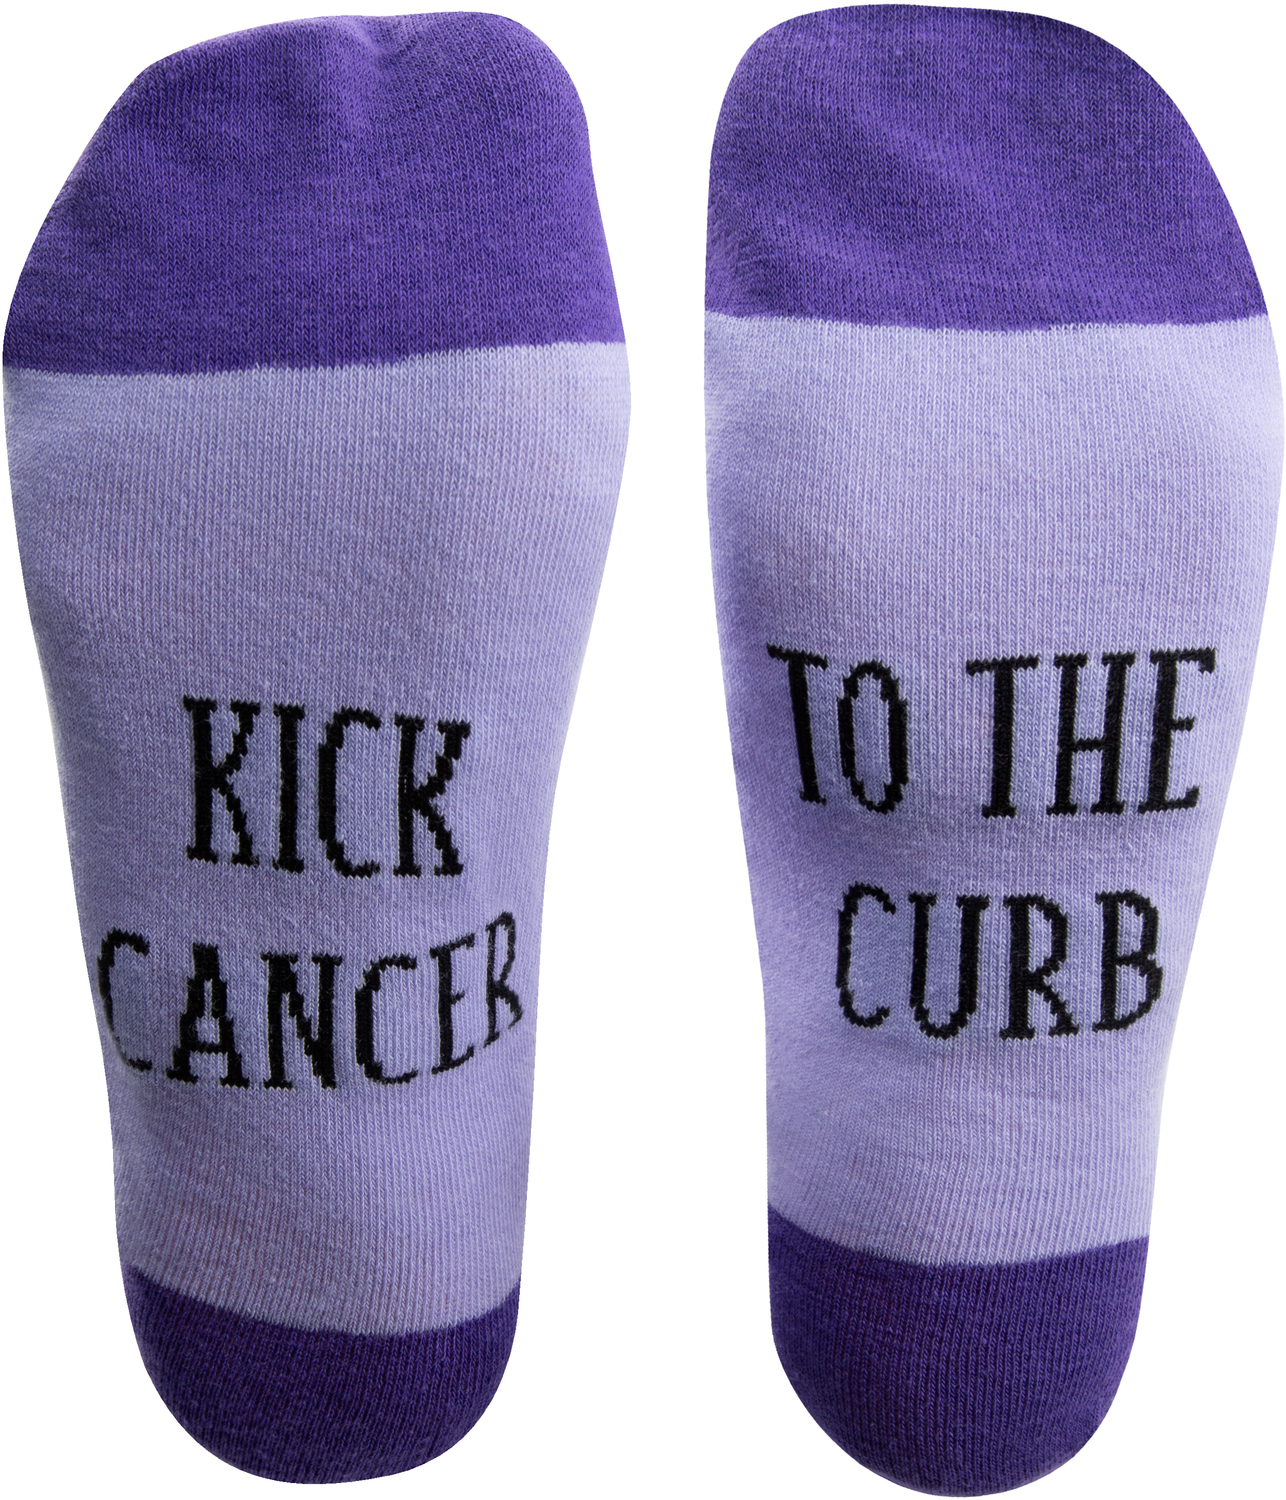 Kick Cancer by Faith Hope and Healing - Kick Cancer - S/M Unisex Sock